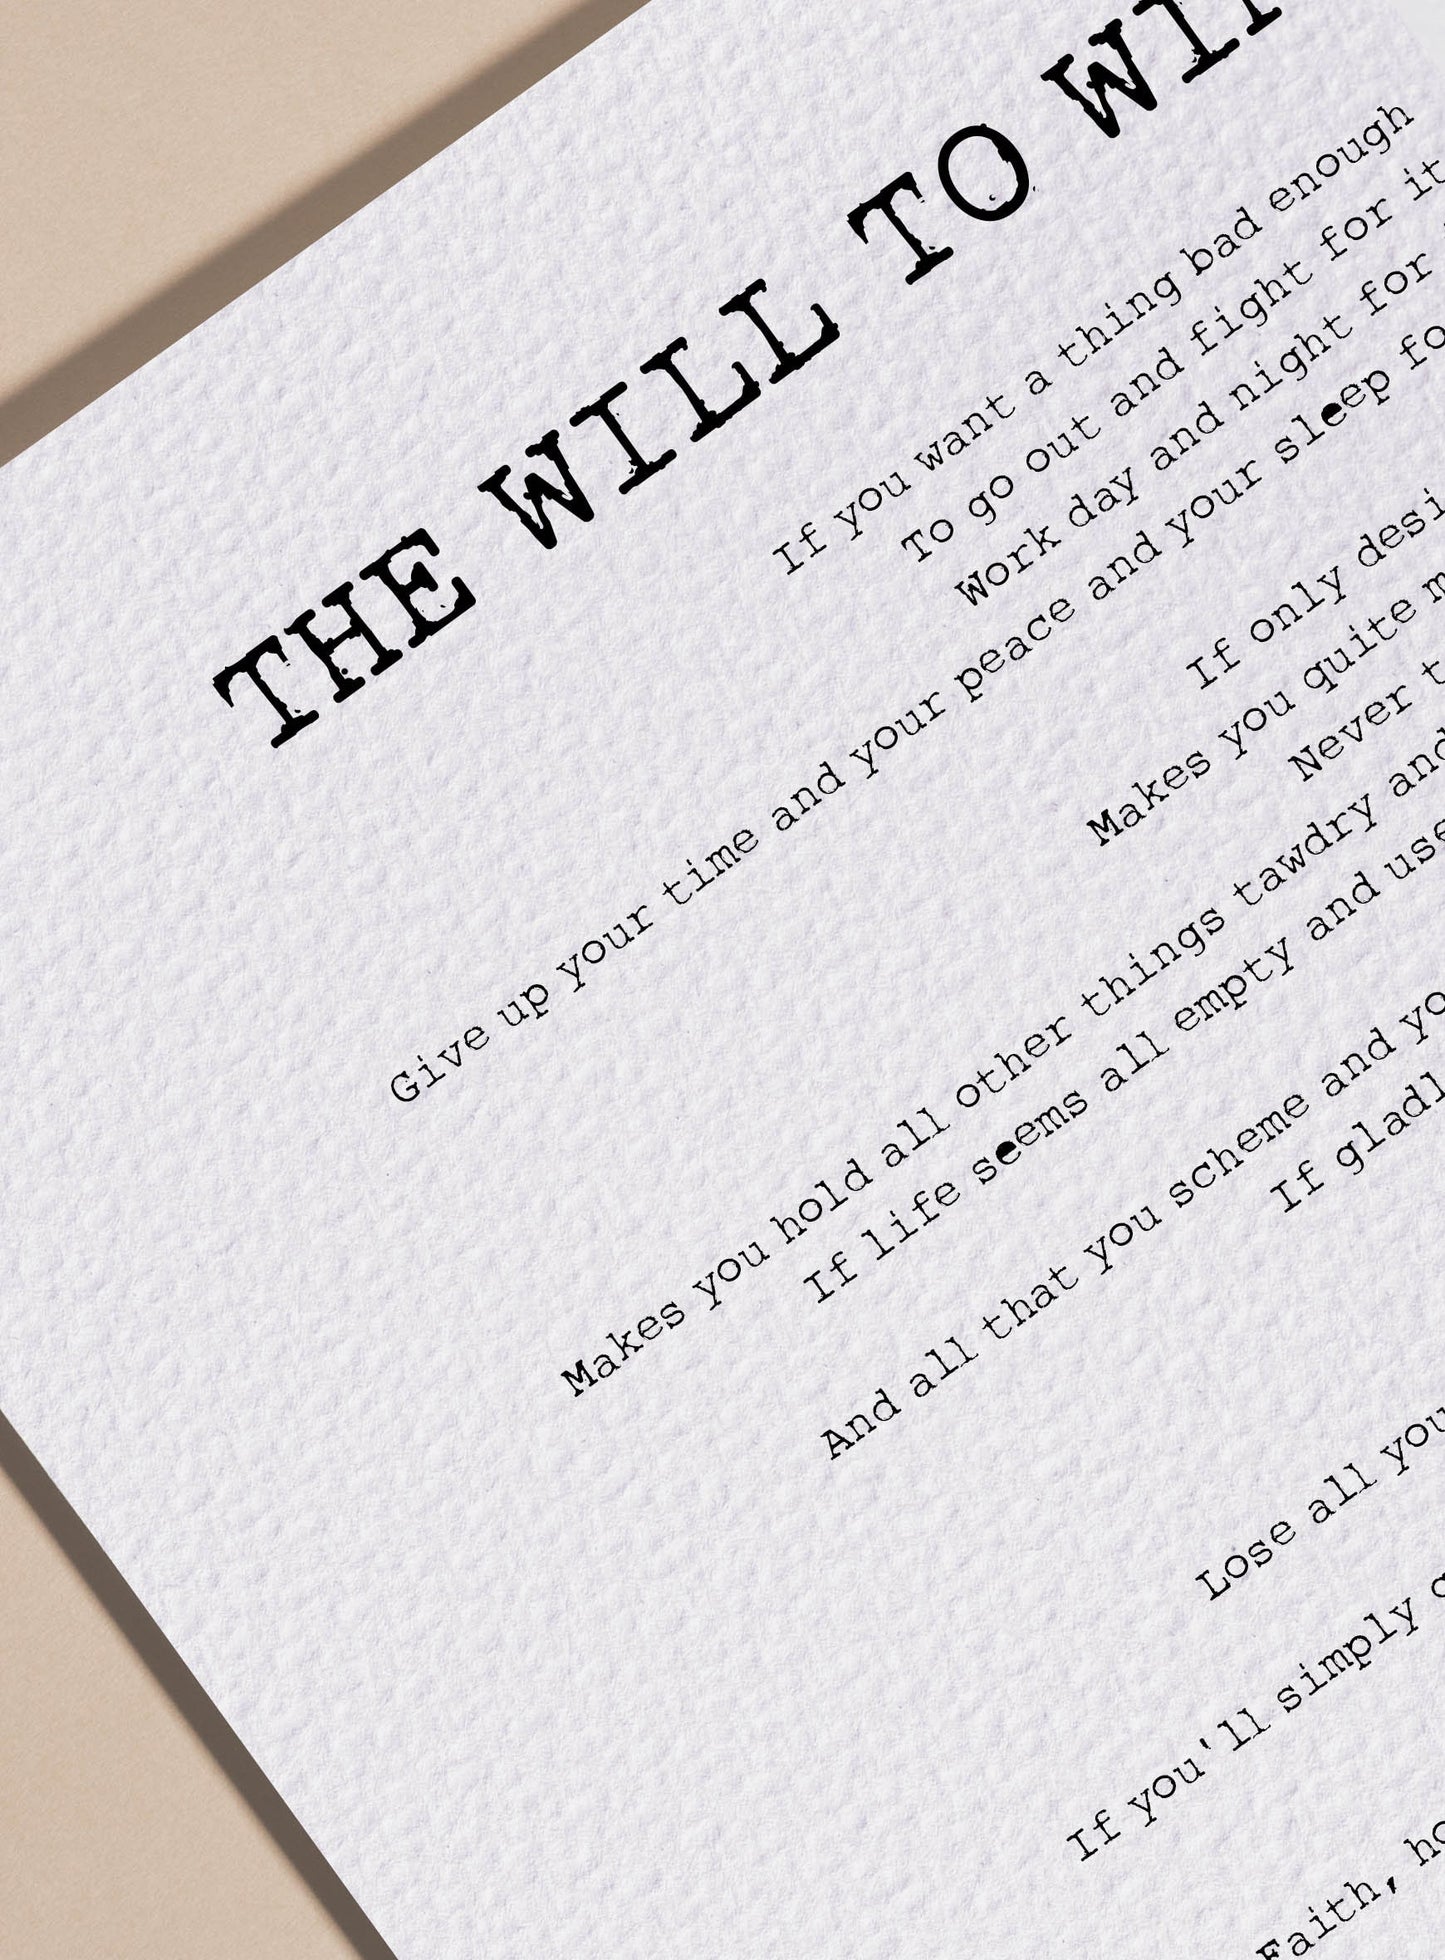 The Will to Win Print Framed Poem by Berton Braley Poster - Great Literature - Winning Mentality - Inspirational speech